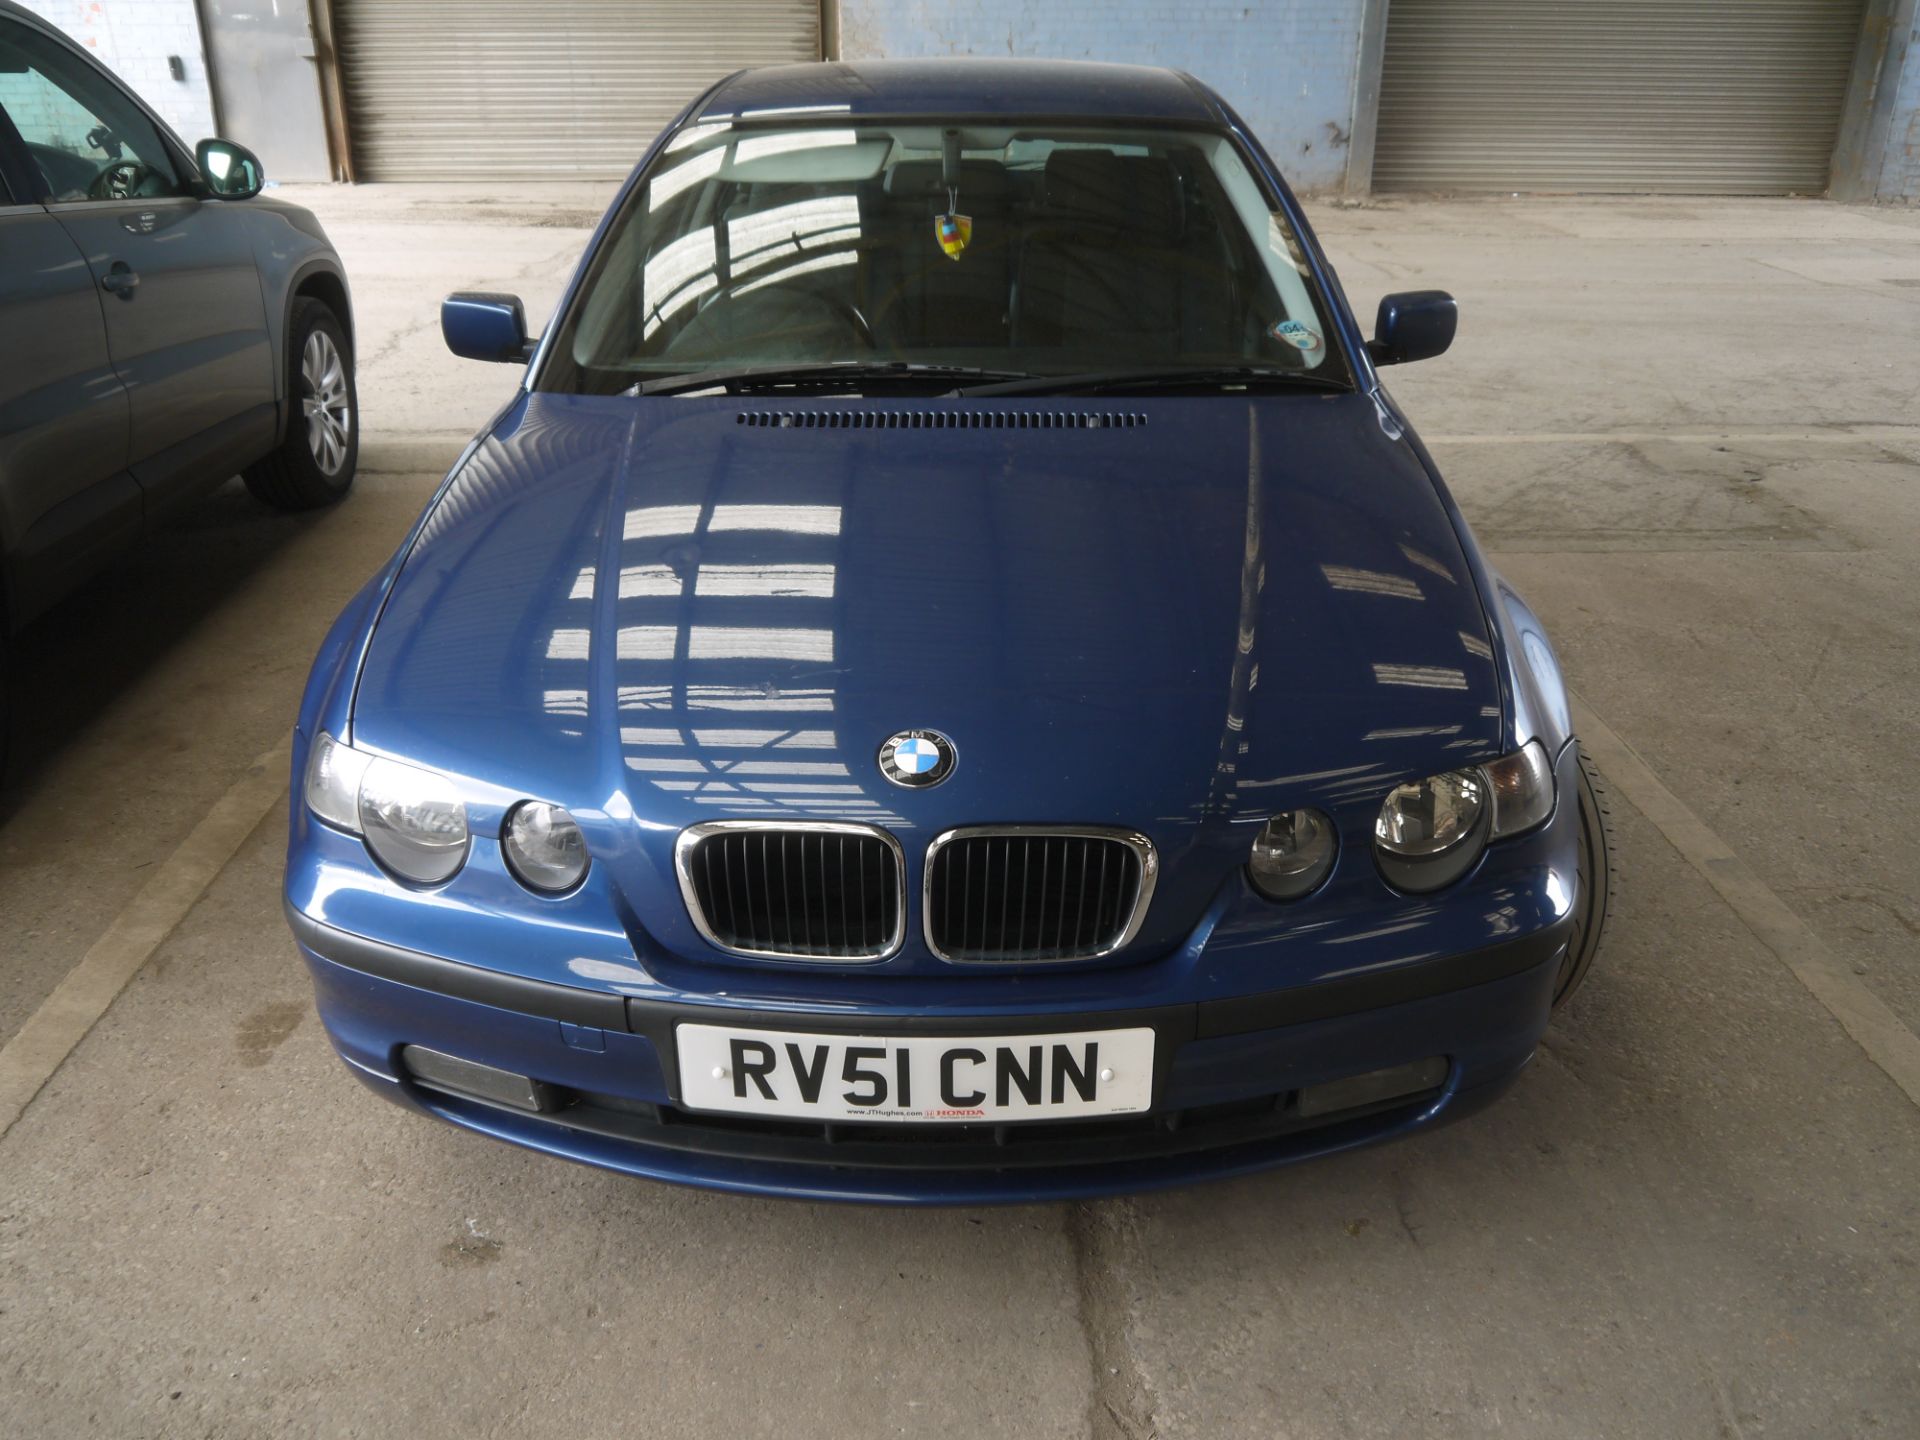 51 Plate BMW 318ti Hatchback, 128750 miles (unchecked), MOT Until 22nd October 2015, Starts & drives